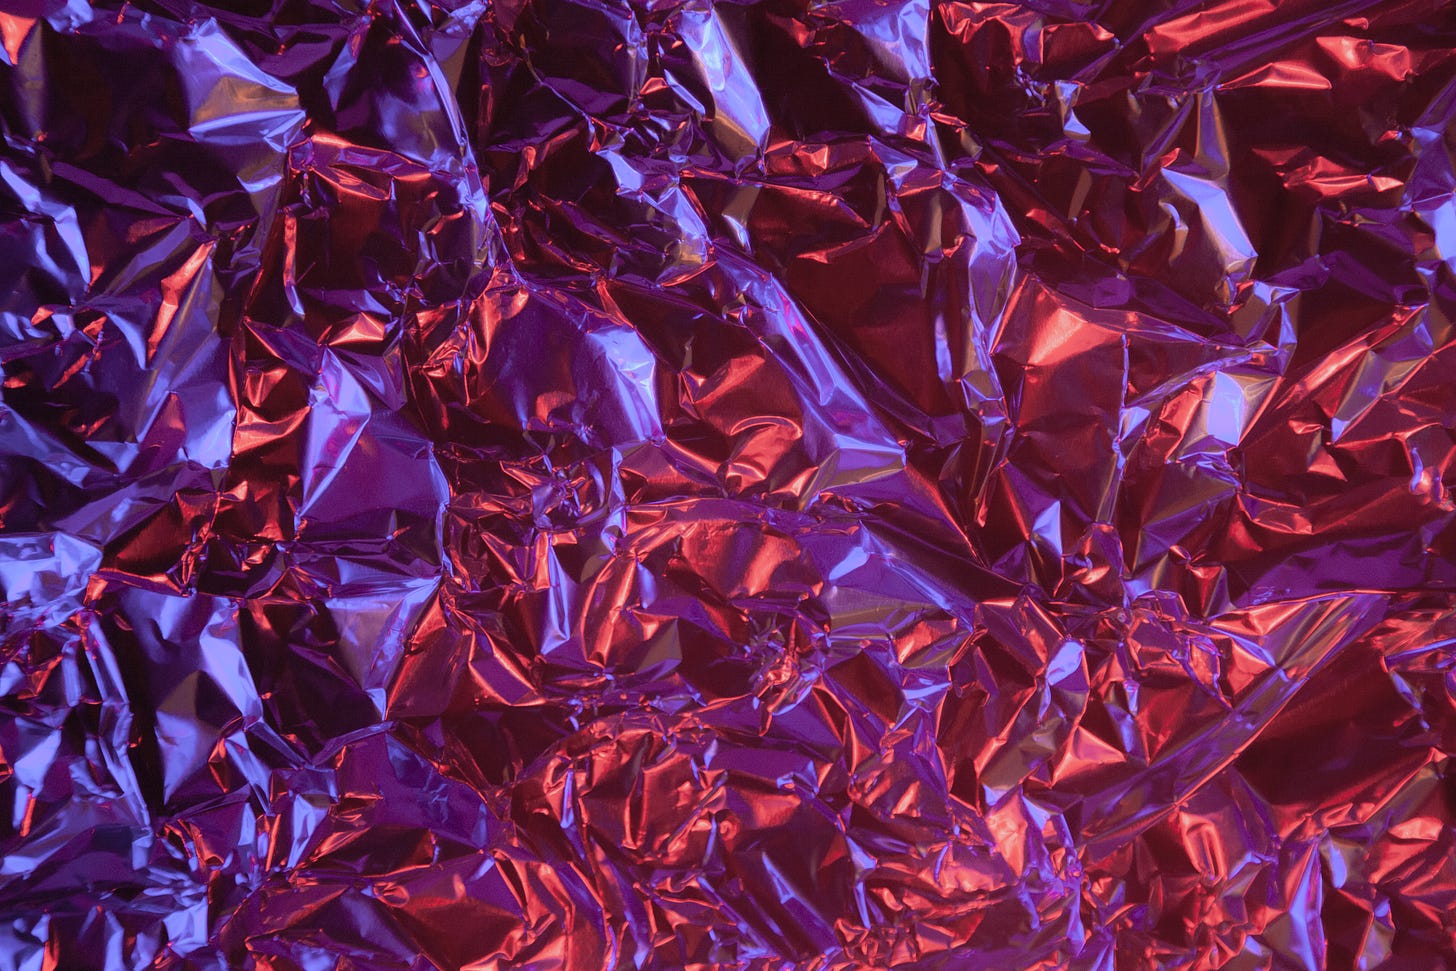 Crinkly purply shiny paper